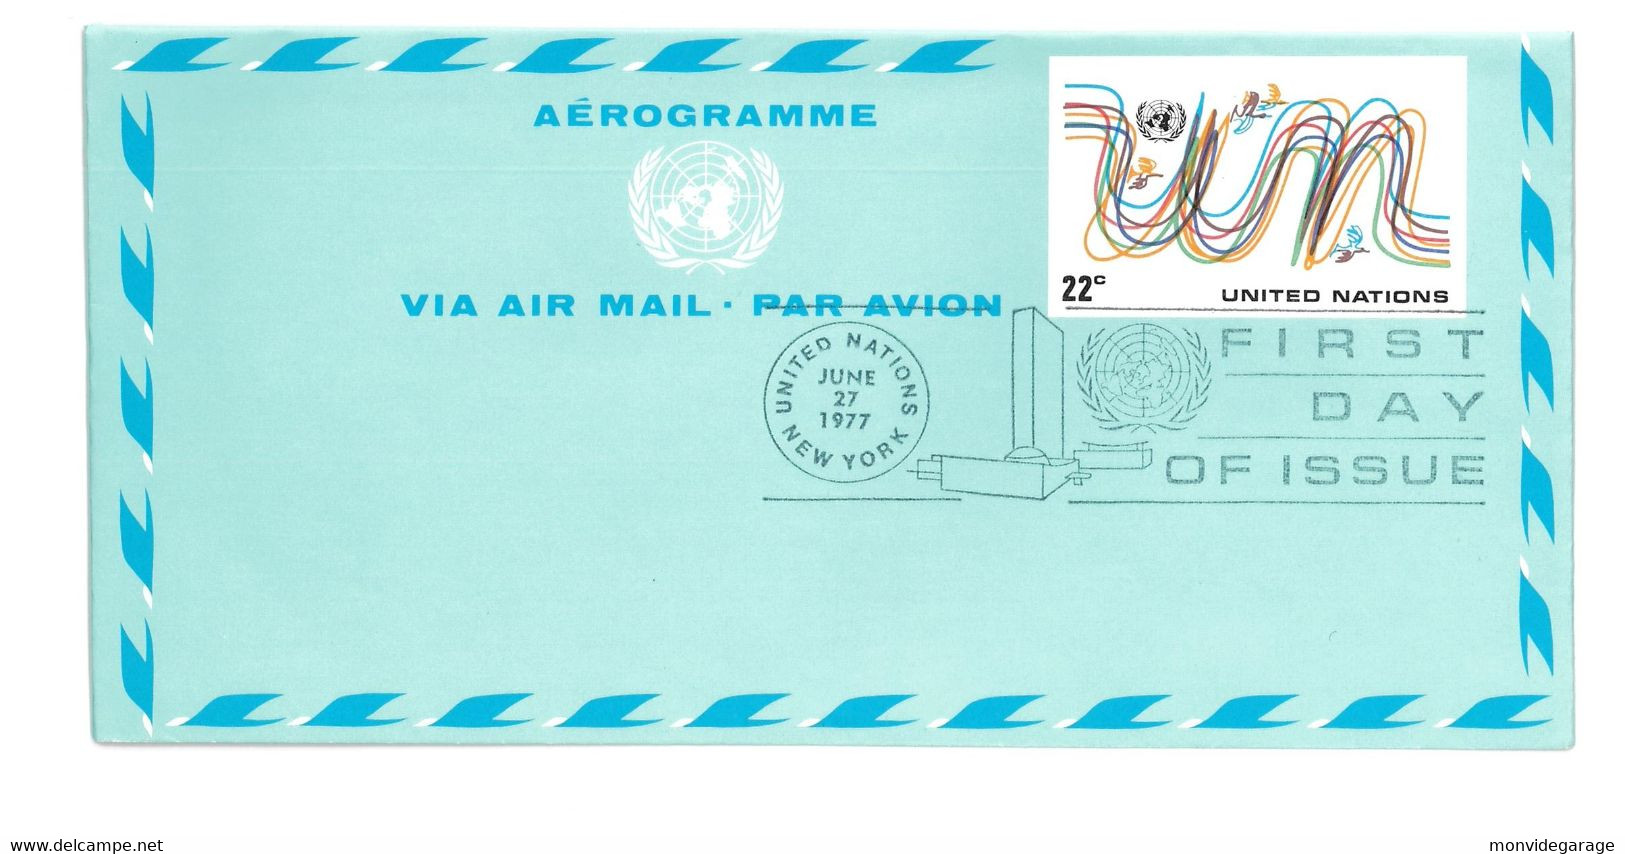 United Nations - Aérogramme - Via Air Mail - Par Avion - First Day Of Issue - 1977 - New York 093 - Airmail